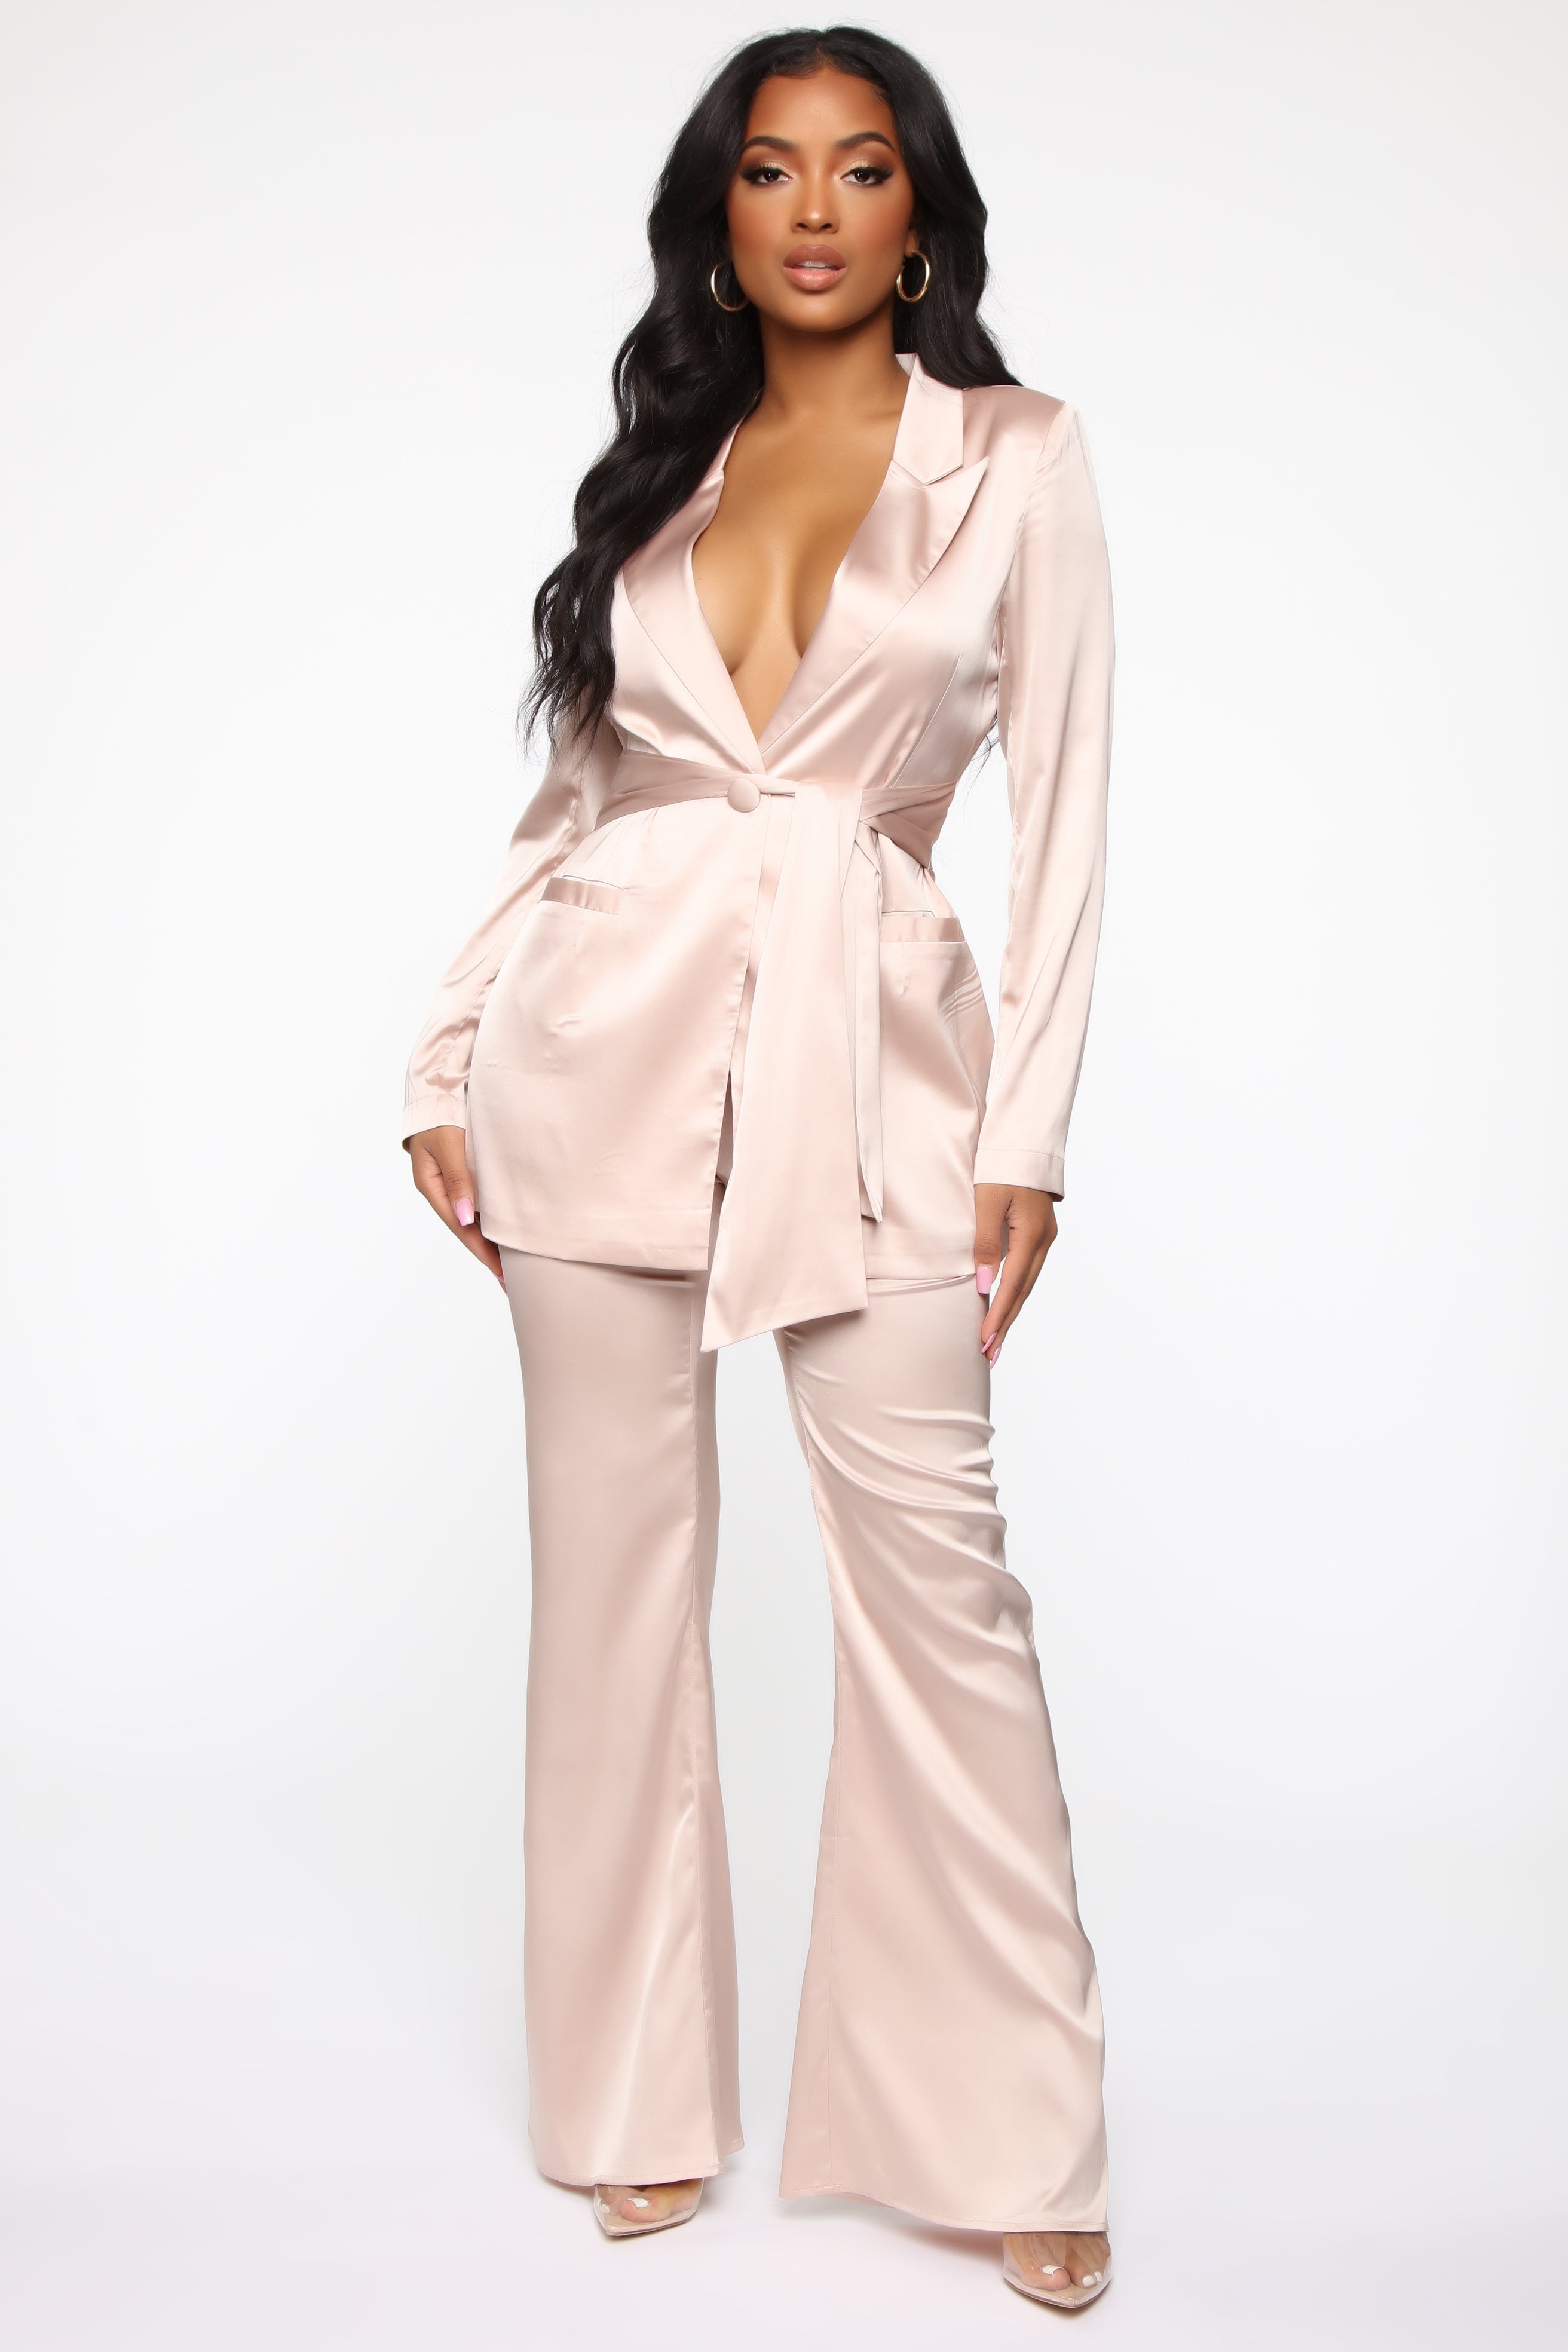 All The Power Satin Suit Set - Nude